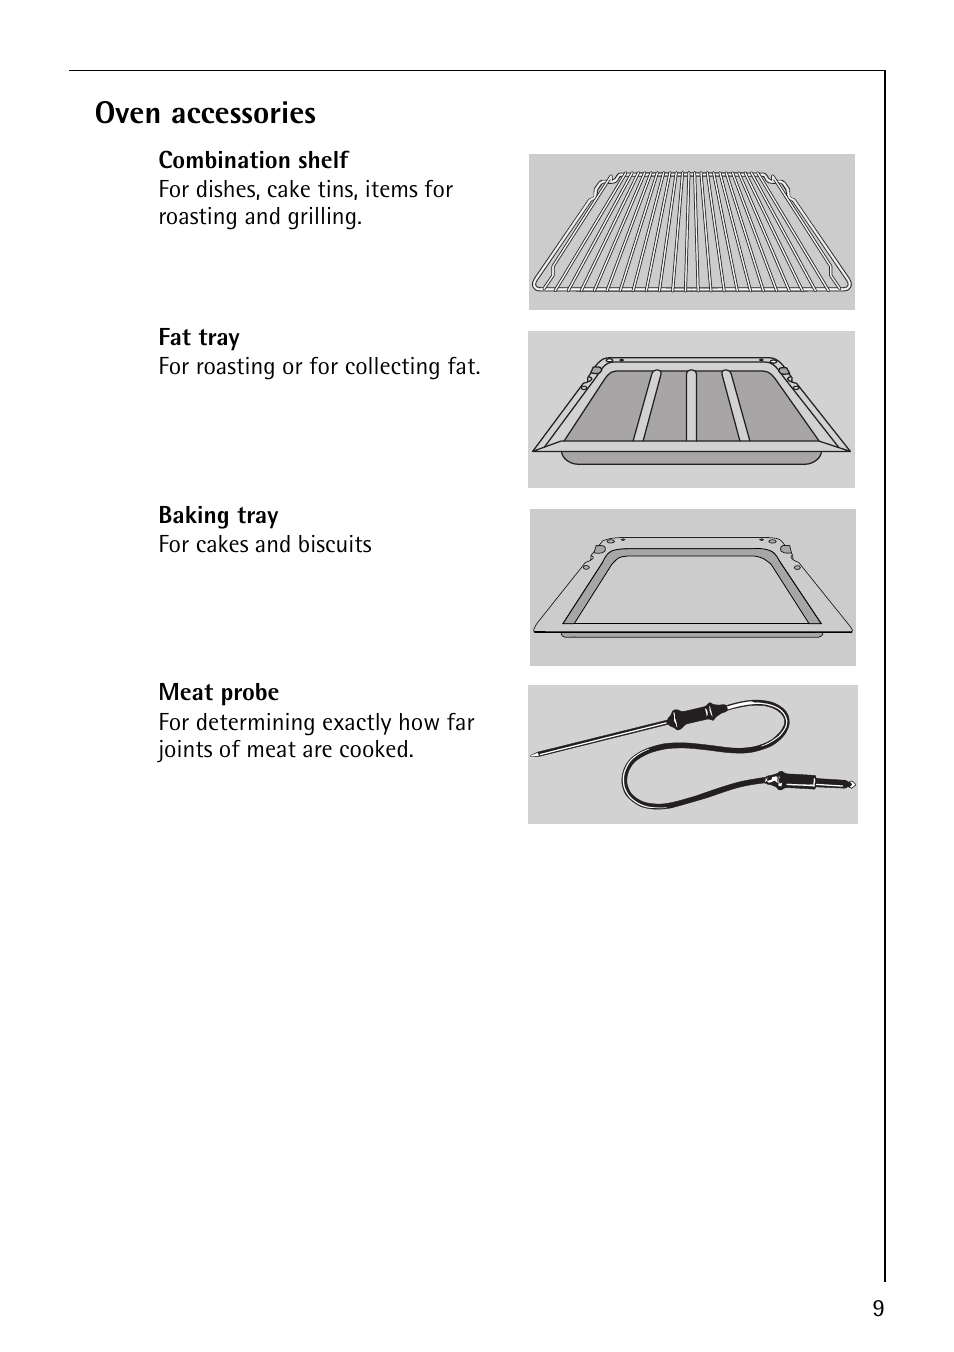 Oven accessories | AEG COMPETENCE E4130-1 User Manual | Page 9 / 56